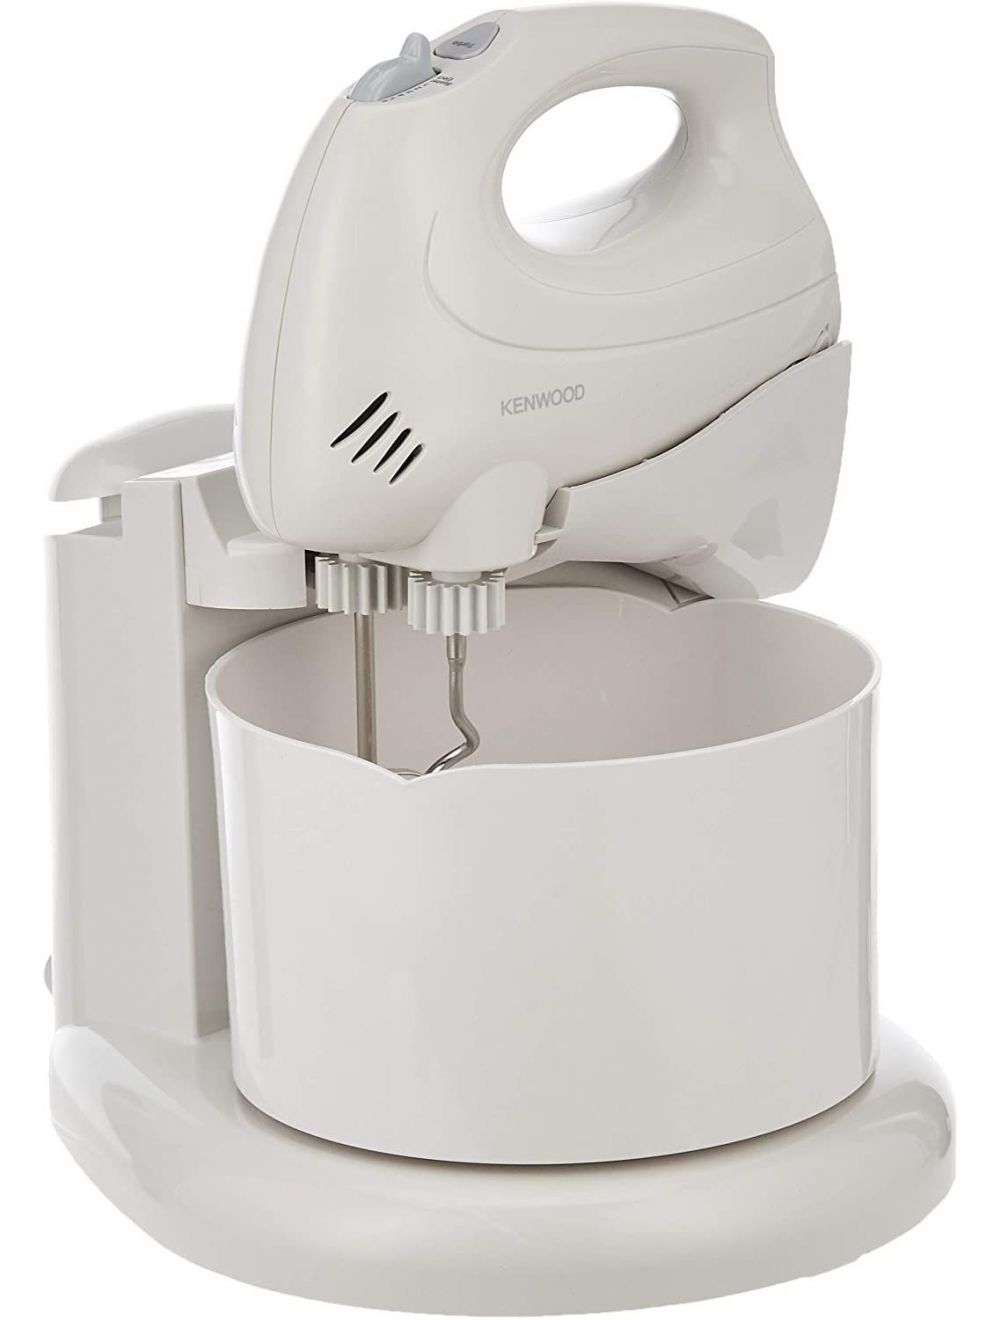 Kenwood Hand Mixer with Bowl, White-HM430